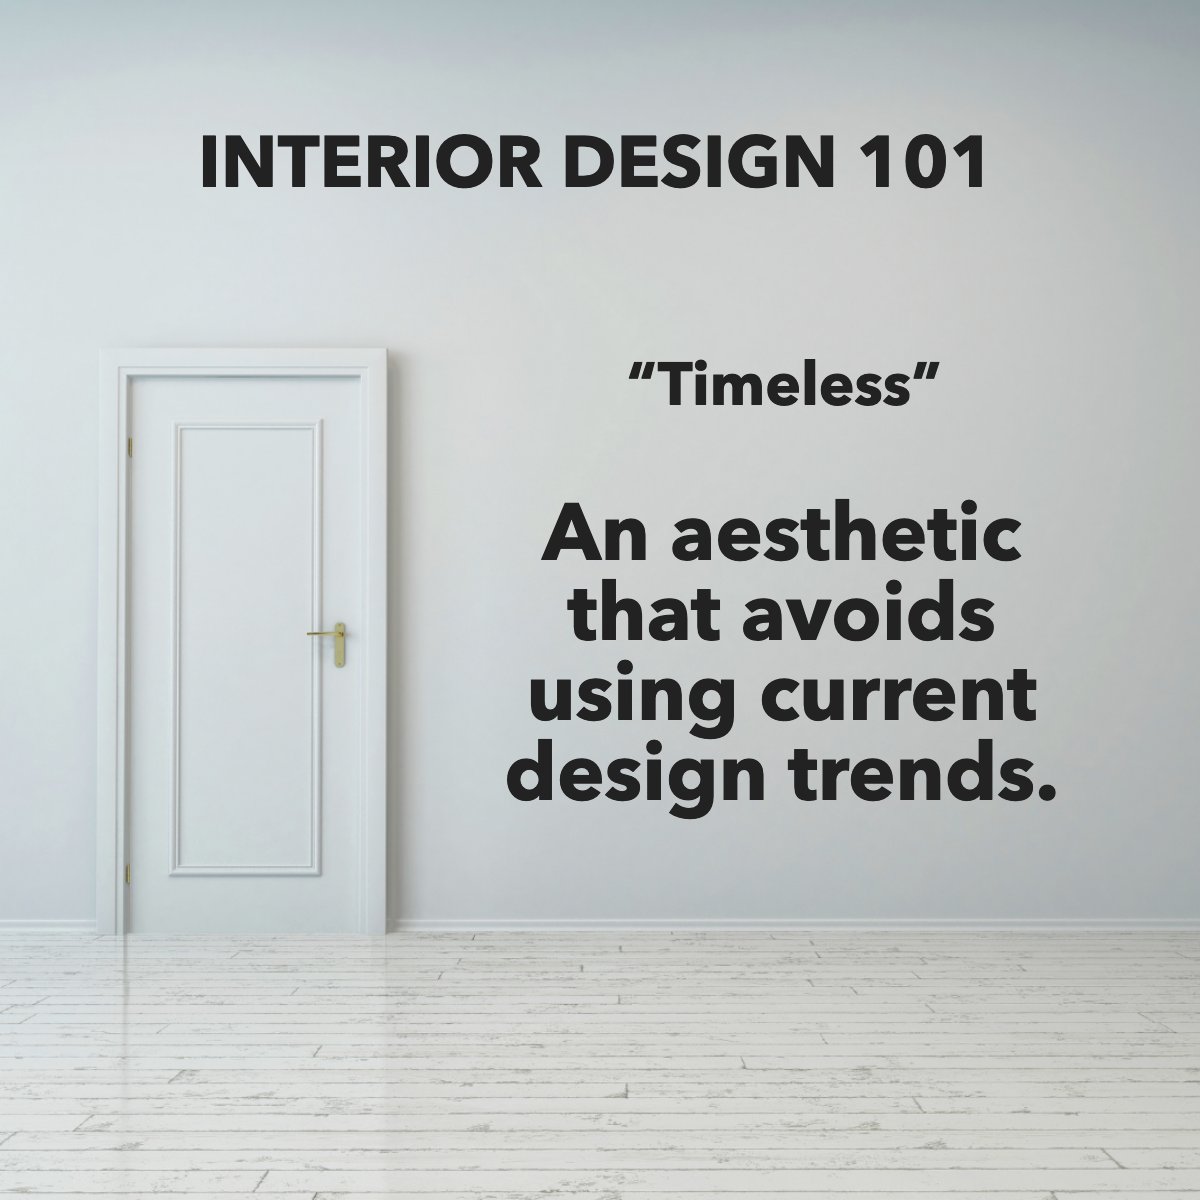 🔝 The longevity of the pieces or aesthetic you choose for your home is a game-changer. 

Have you ever thought about 'Timeless' as an aesthetic? 🤔

#interiordesigntips   #interiordesigngoals   #interiordesigninspo   #moderninteriordesign   #interiordesigntrends